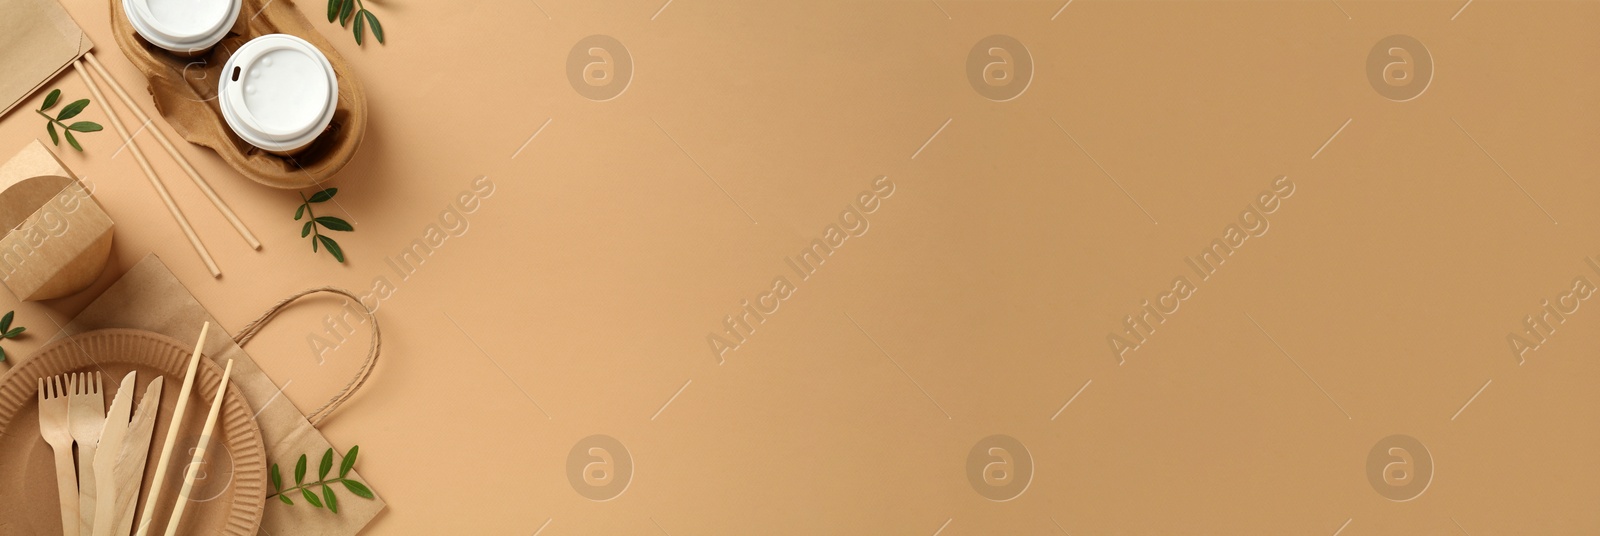 Image of Eco friendly products on beige background, flat lay with space for text. Banner design